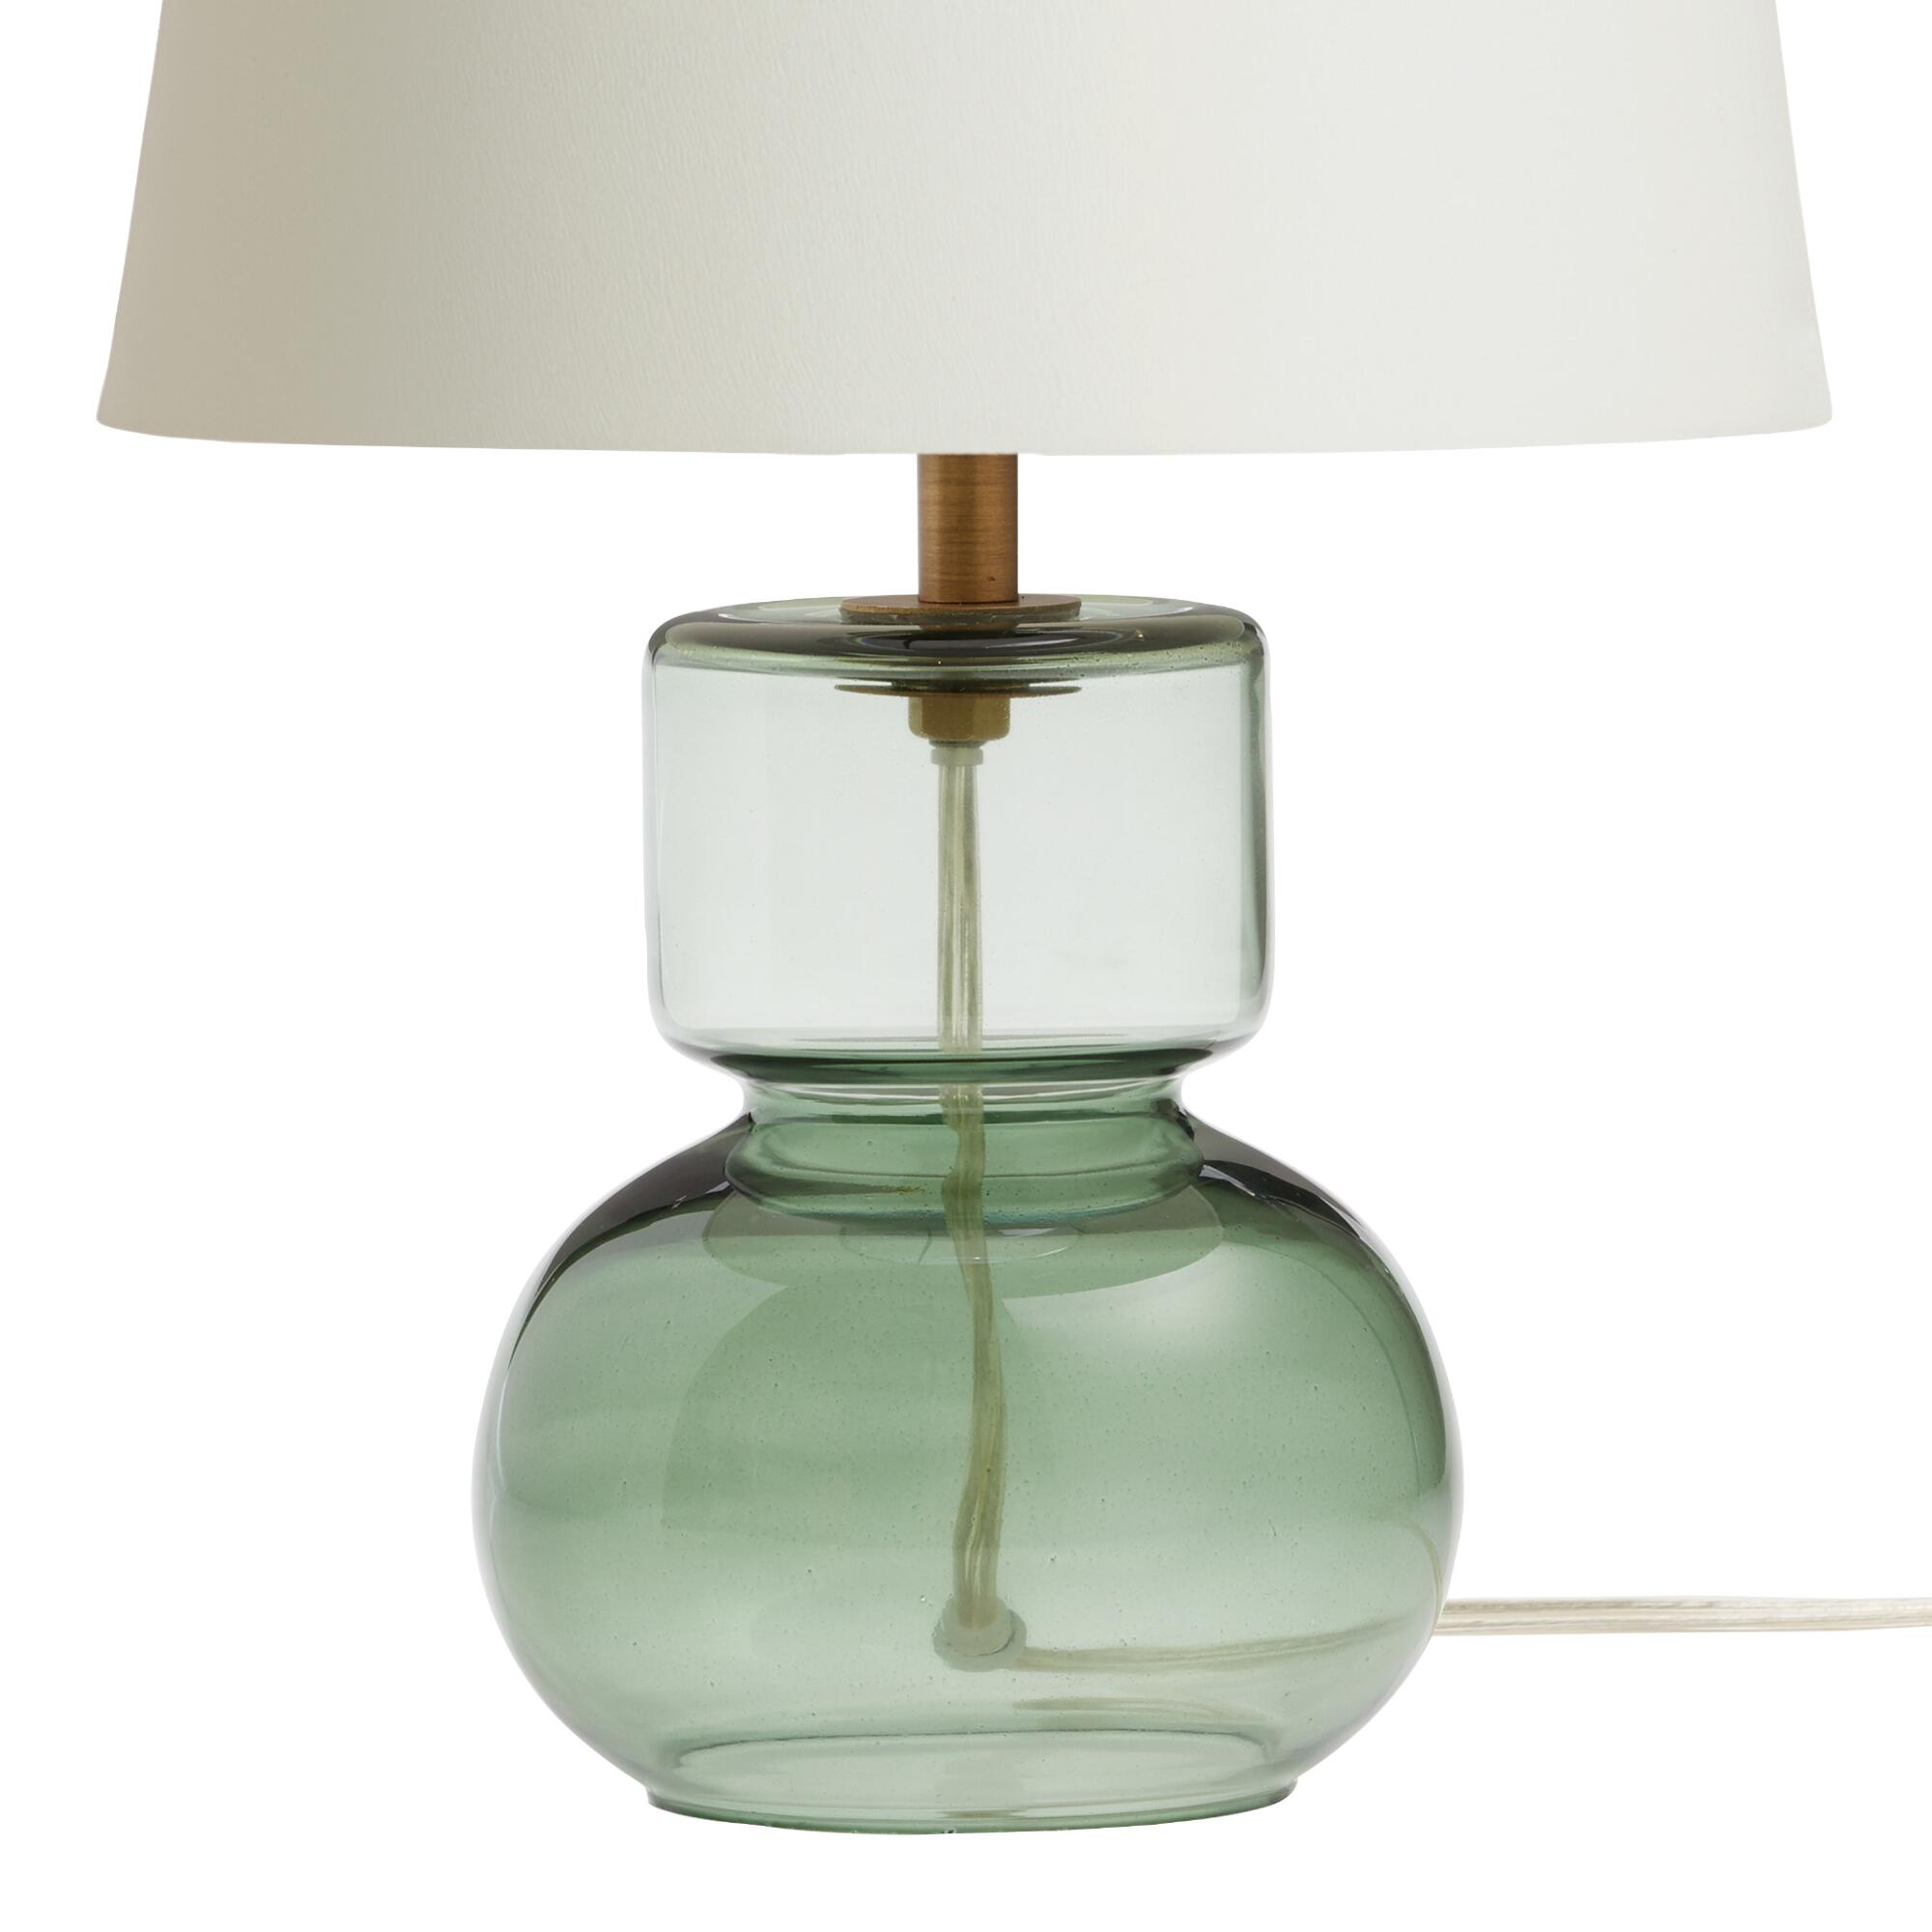 Green Glass Olivia Accent Lamp Base - Small by World Market